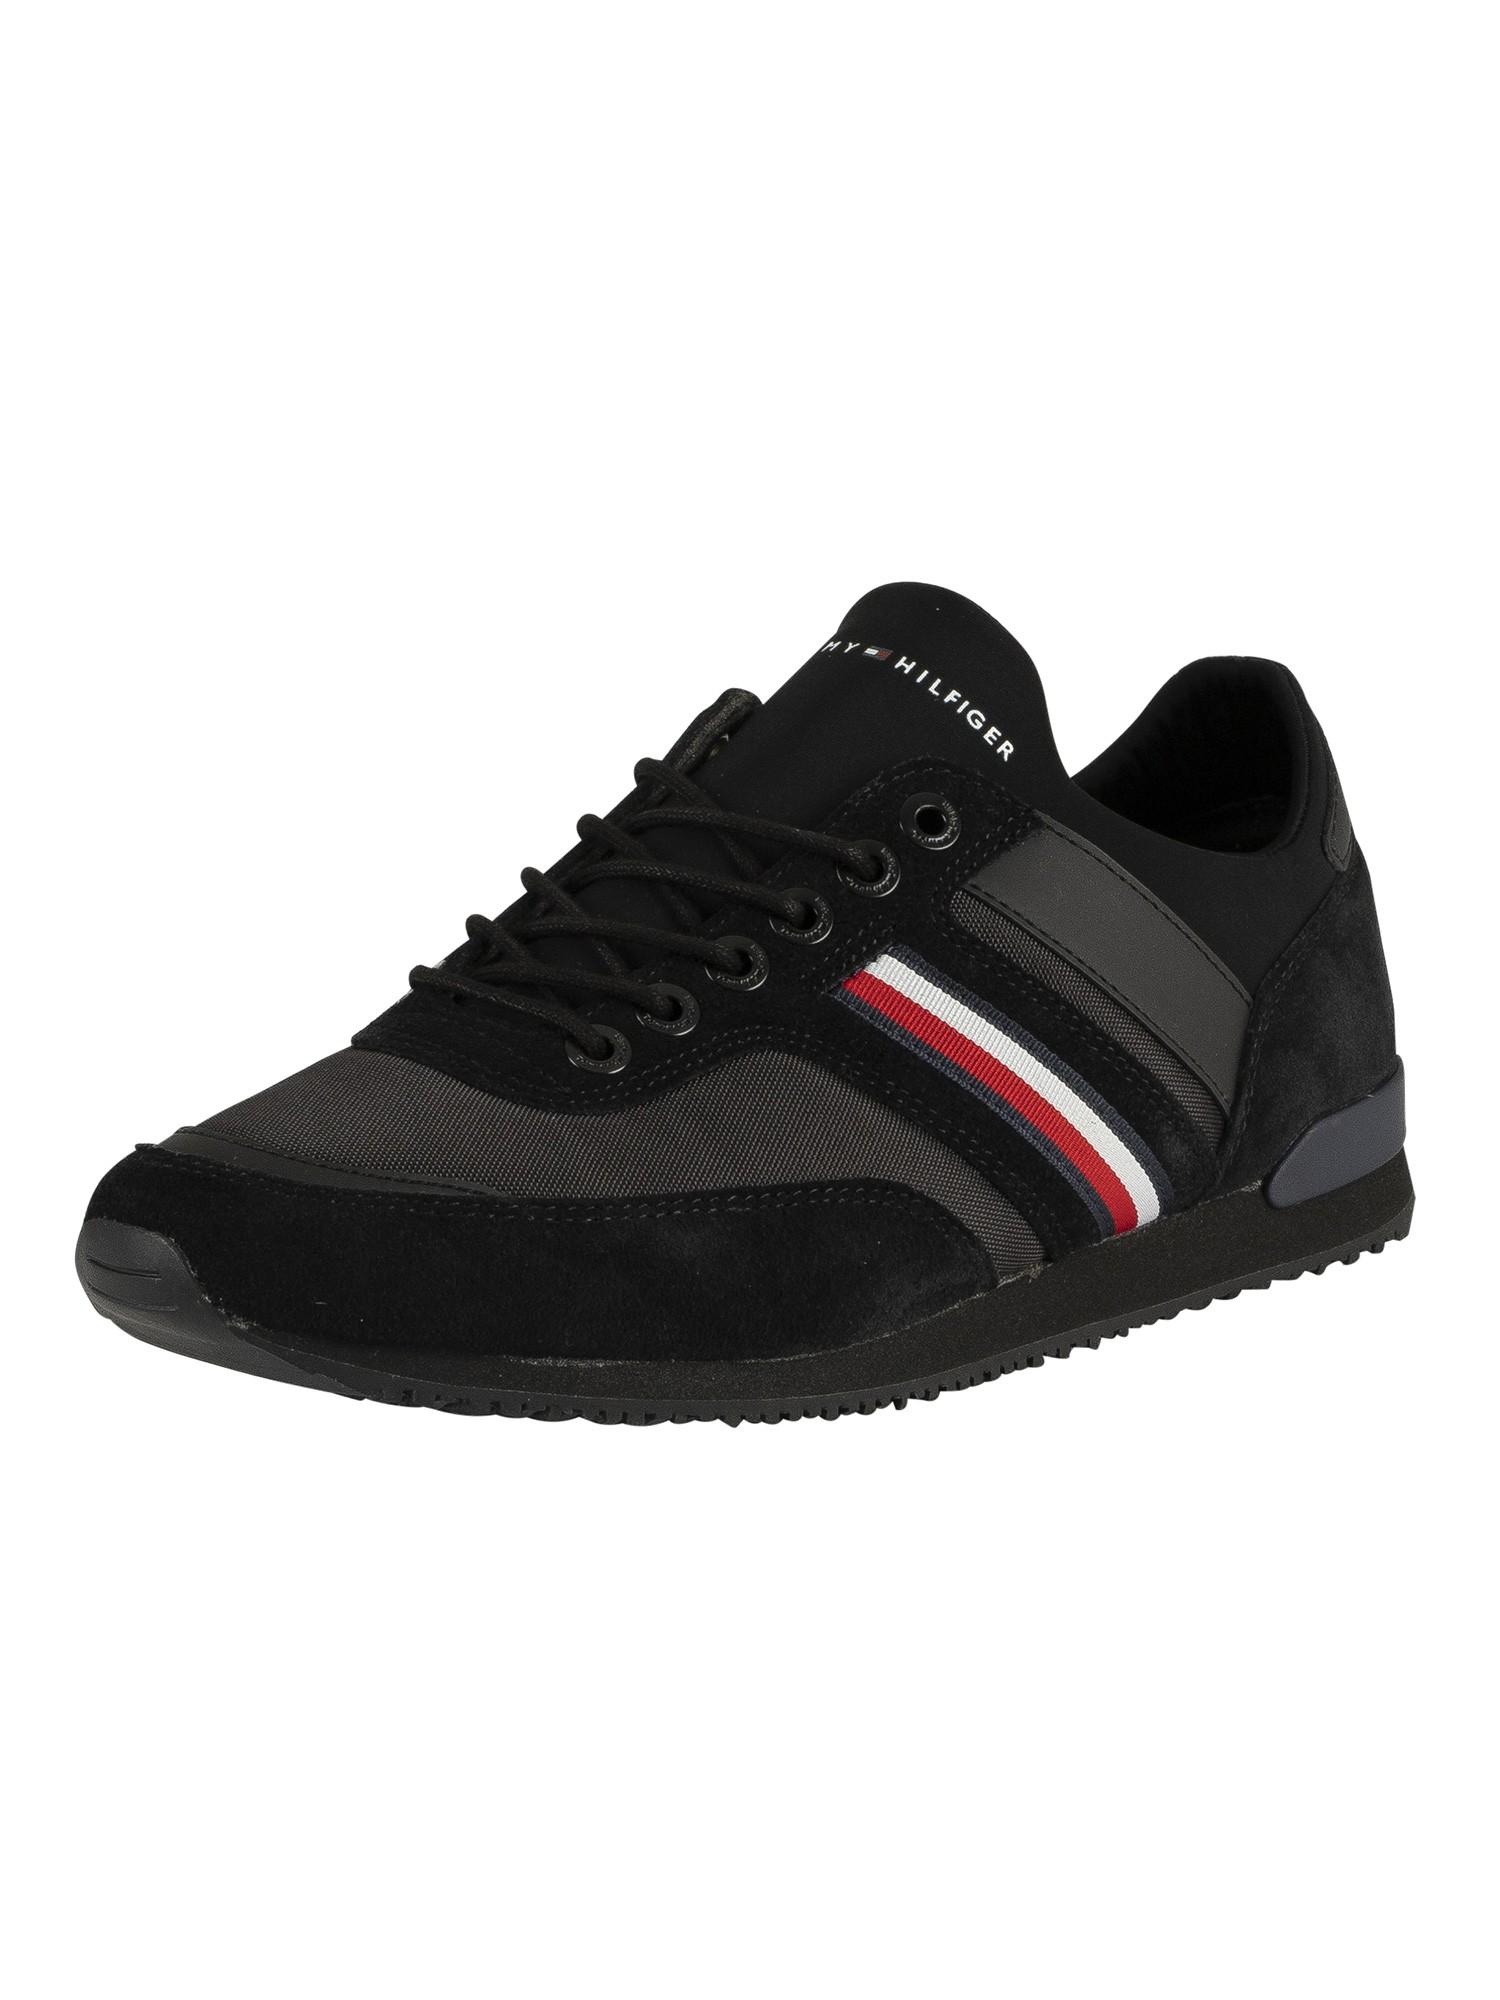 Tommy Hilfiger Men's Mixed Material Iconic Runner Trainers 